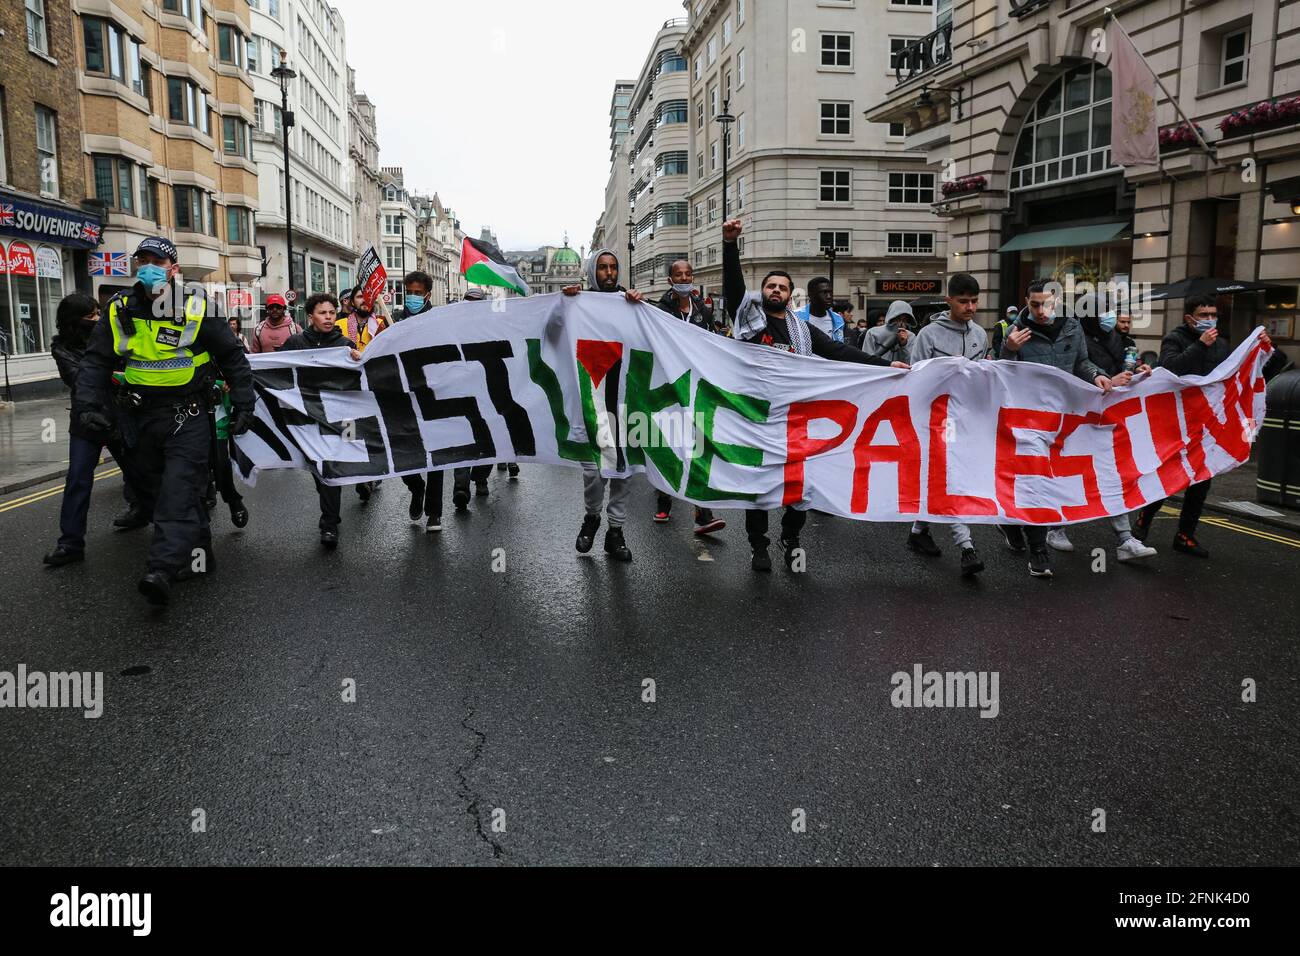 London, UK. 15 May 2021. Supporters of Palestine at the March for Palestine in Piccadilly Circus. Credit: Waldemar Sikora Stock Photo